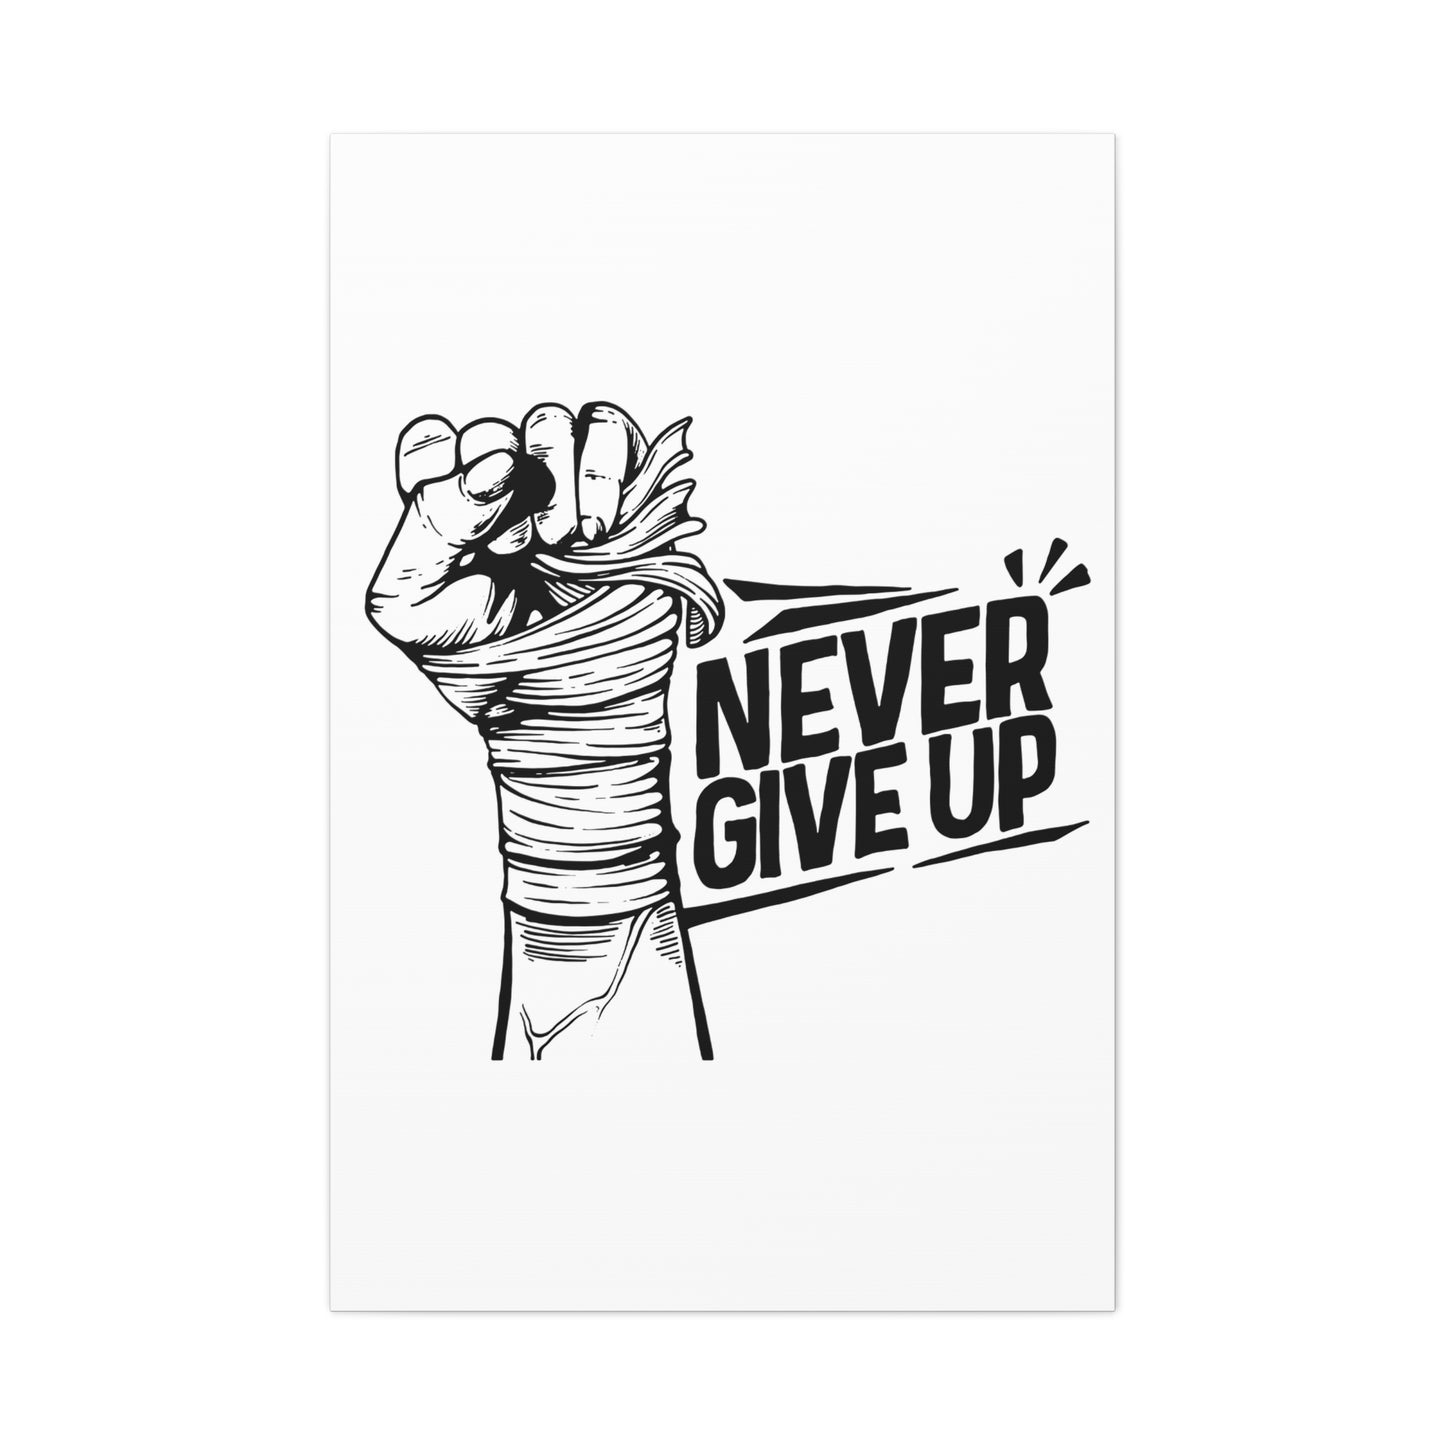 Never give up Wall Art & Canvas Prints